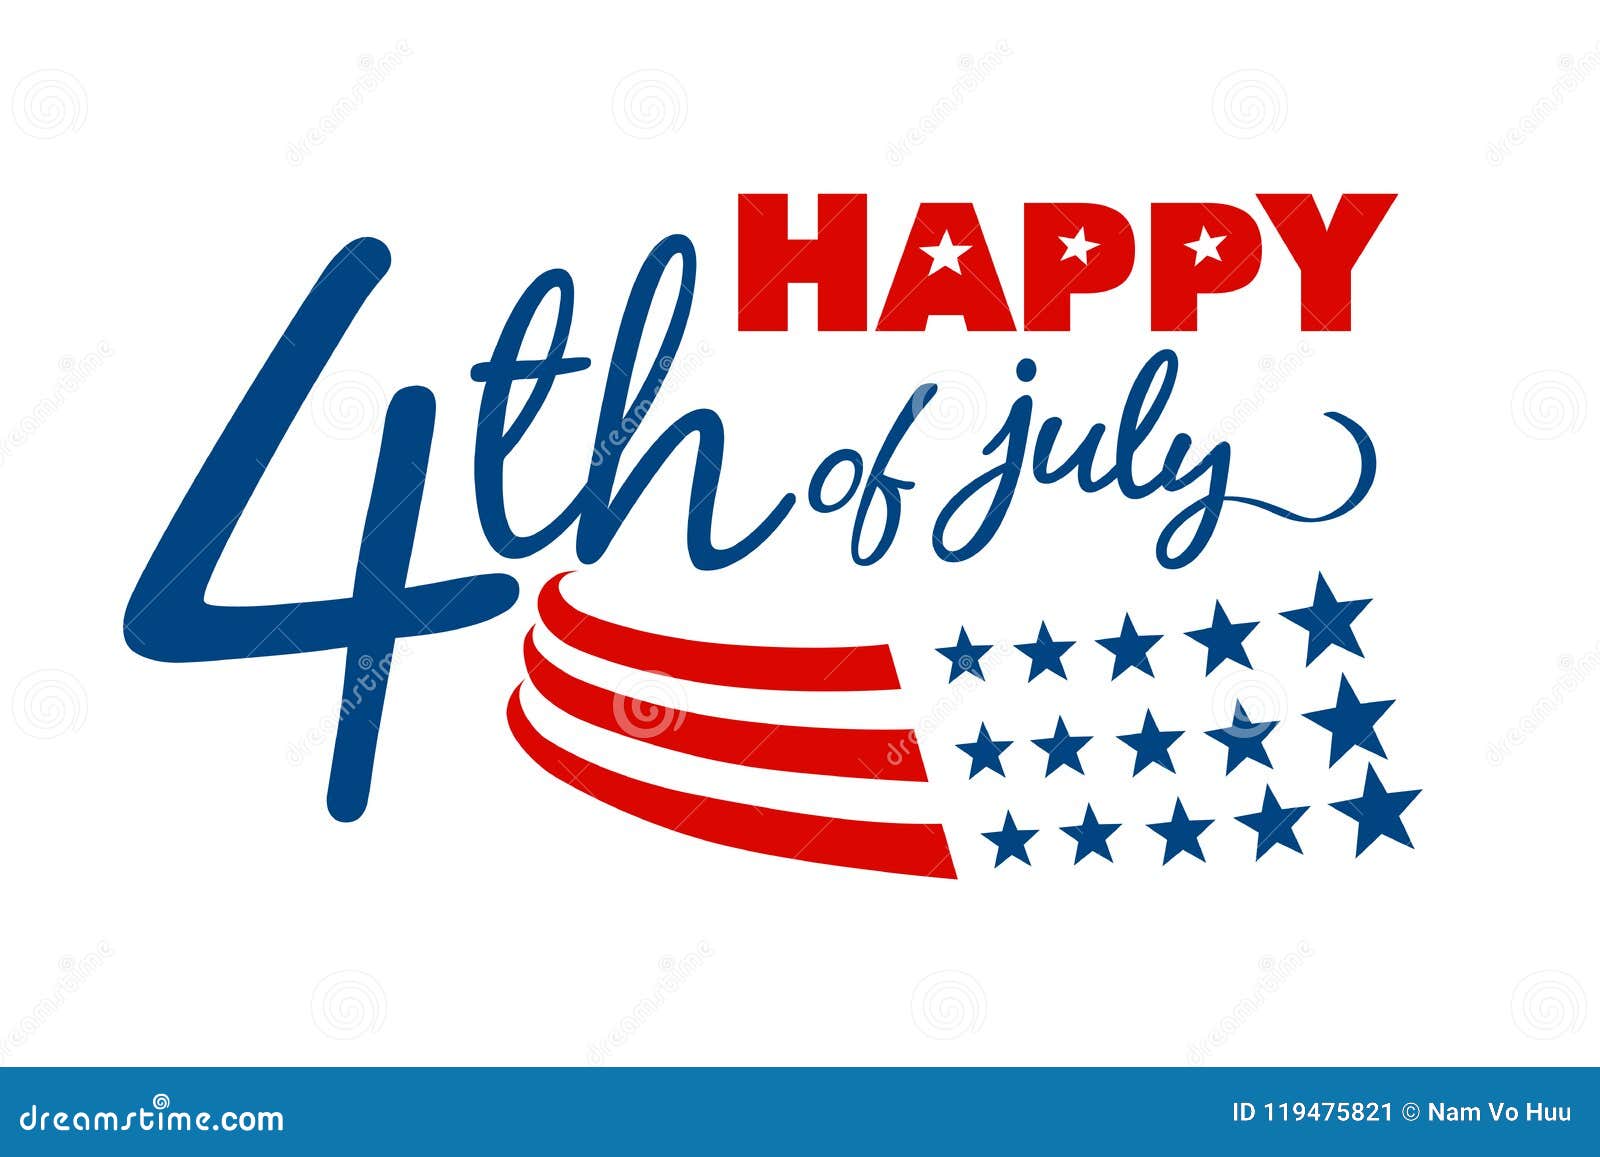 happy 4th of july message